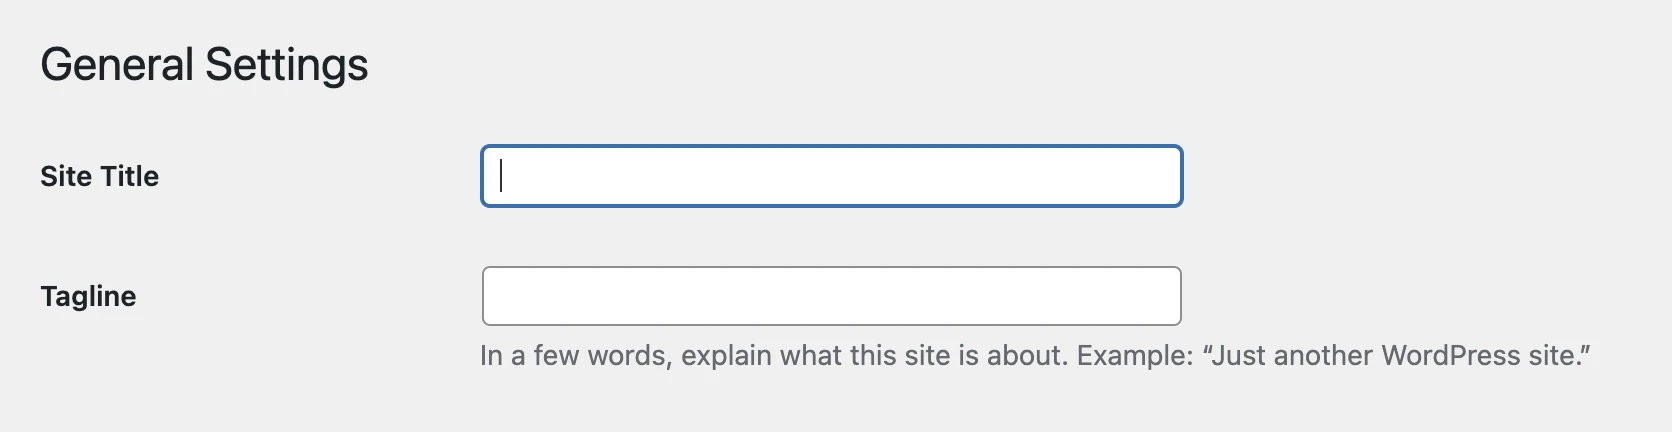 Under "General Settings," empty field boxes for "Site Title" and "Tagline" with microcopy explaining the function.